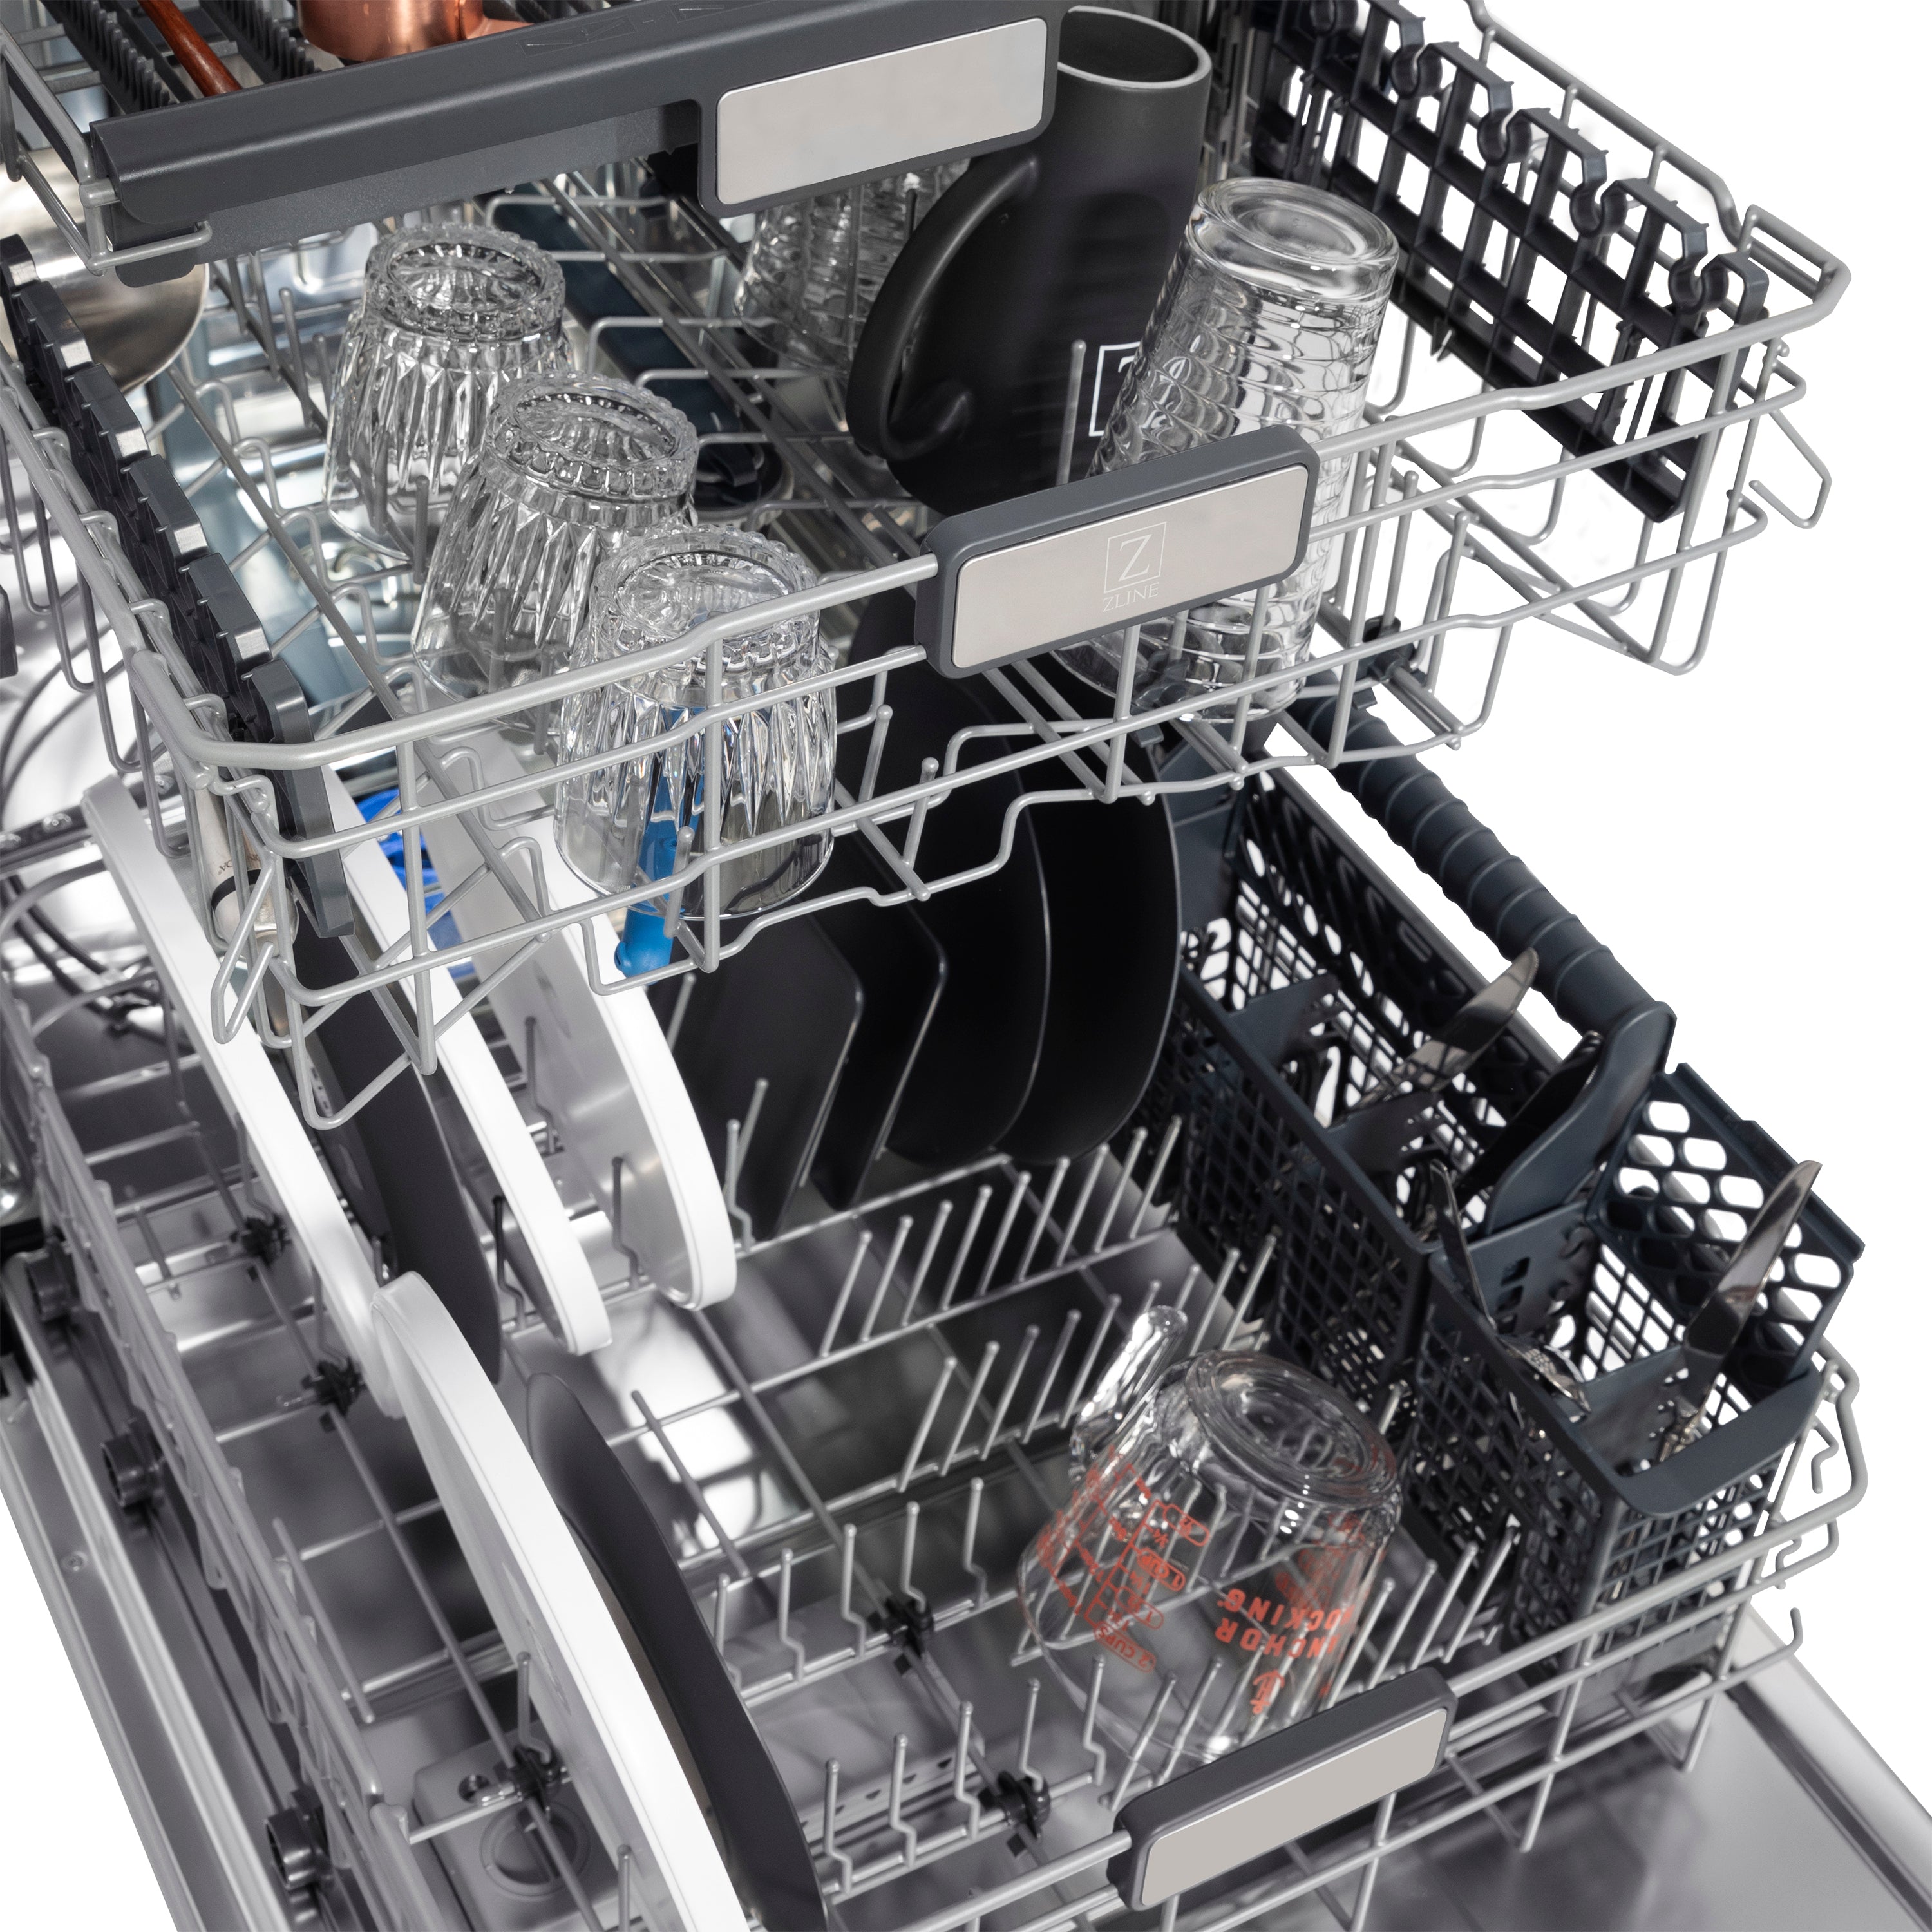 ZLINE 24" Monument Series 3rd Rack Top Touch Control Dishwasher in Black Stainless Steel with Stainless Steel Tub, 45dBa